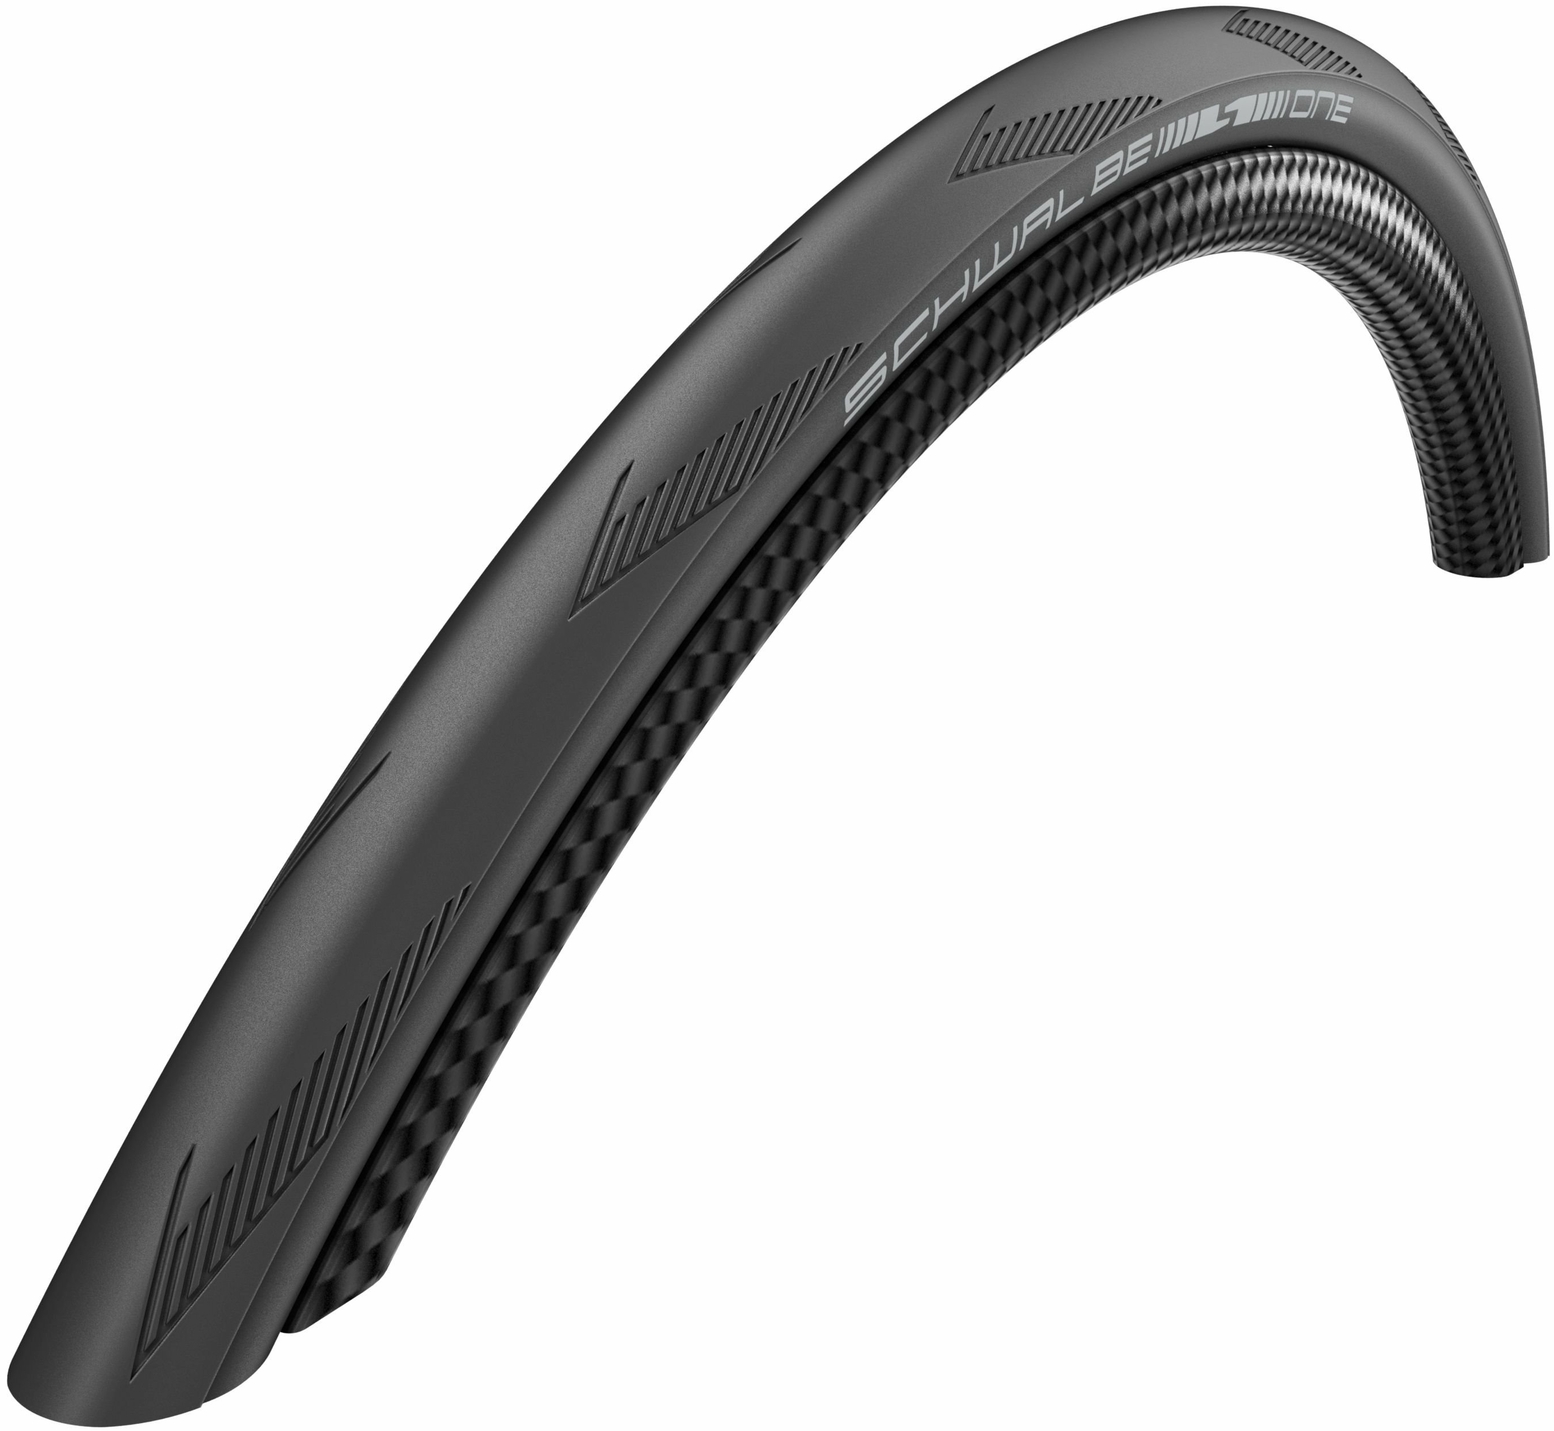 Fahrradteile/Bereifung: Schwalbe  R 462a One ss pl tt 25-622 One HS 462 a Tube Type 